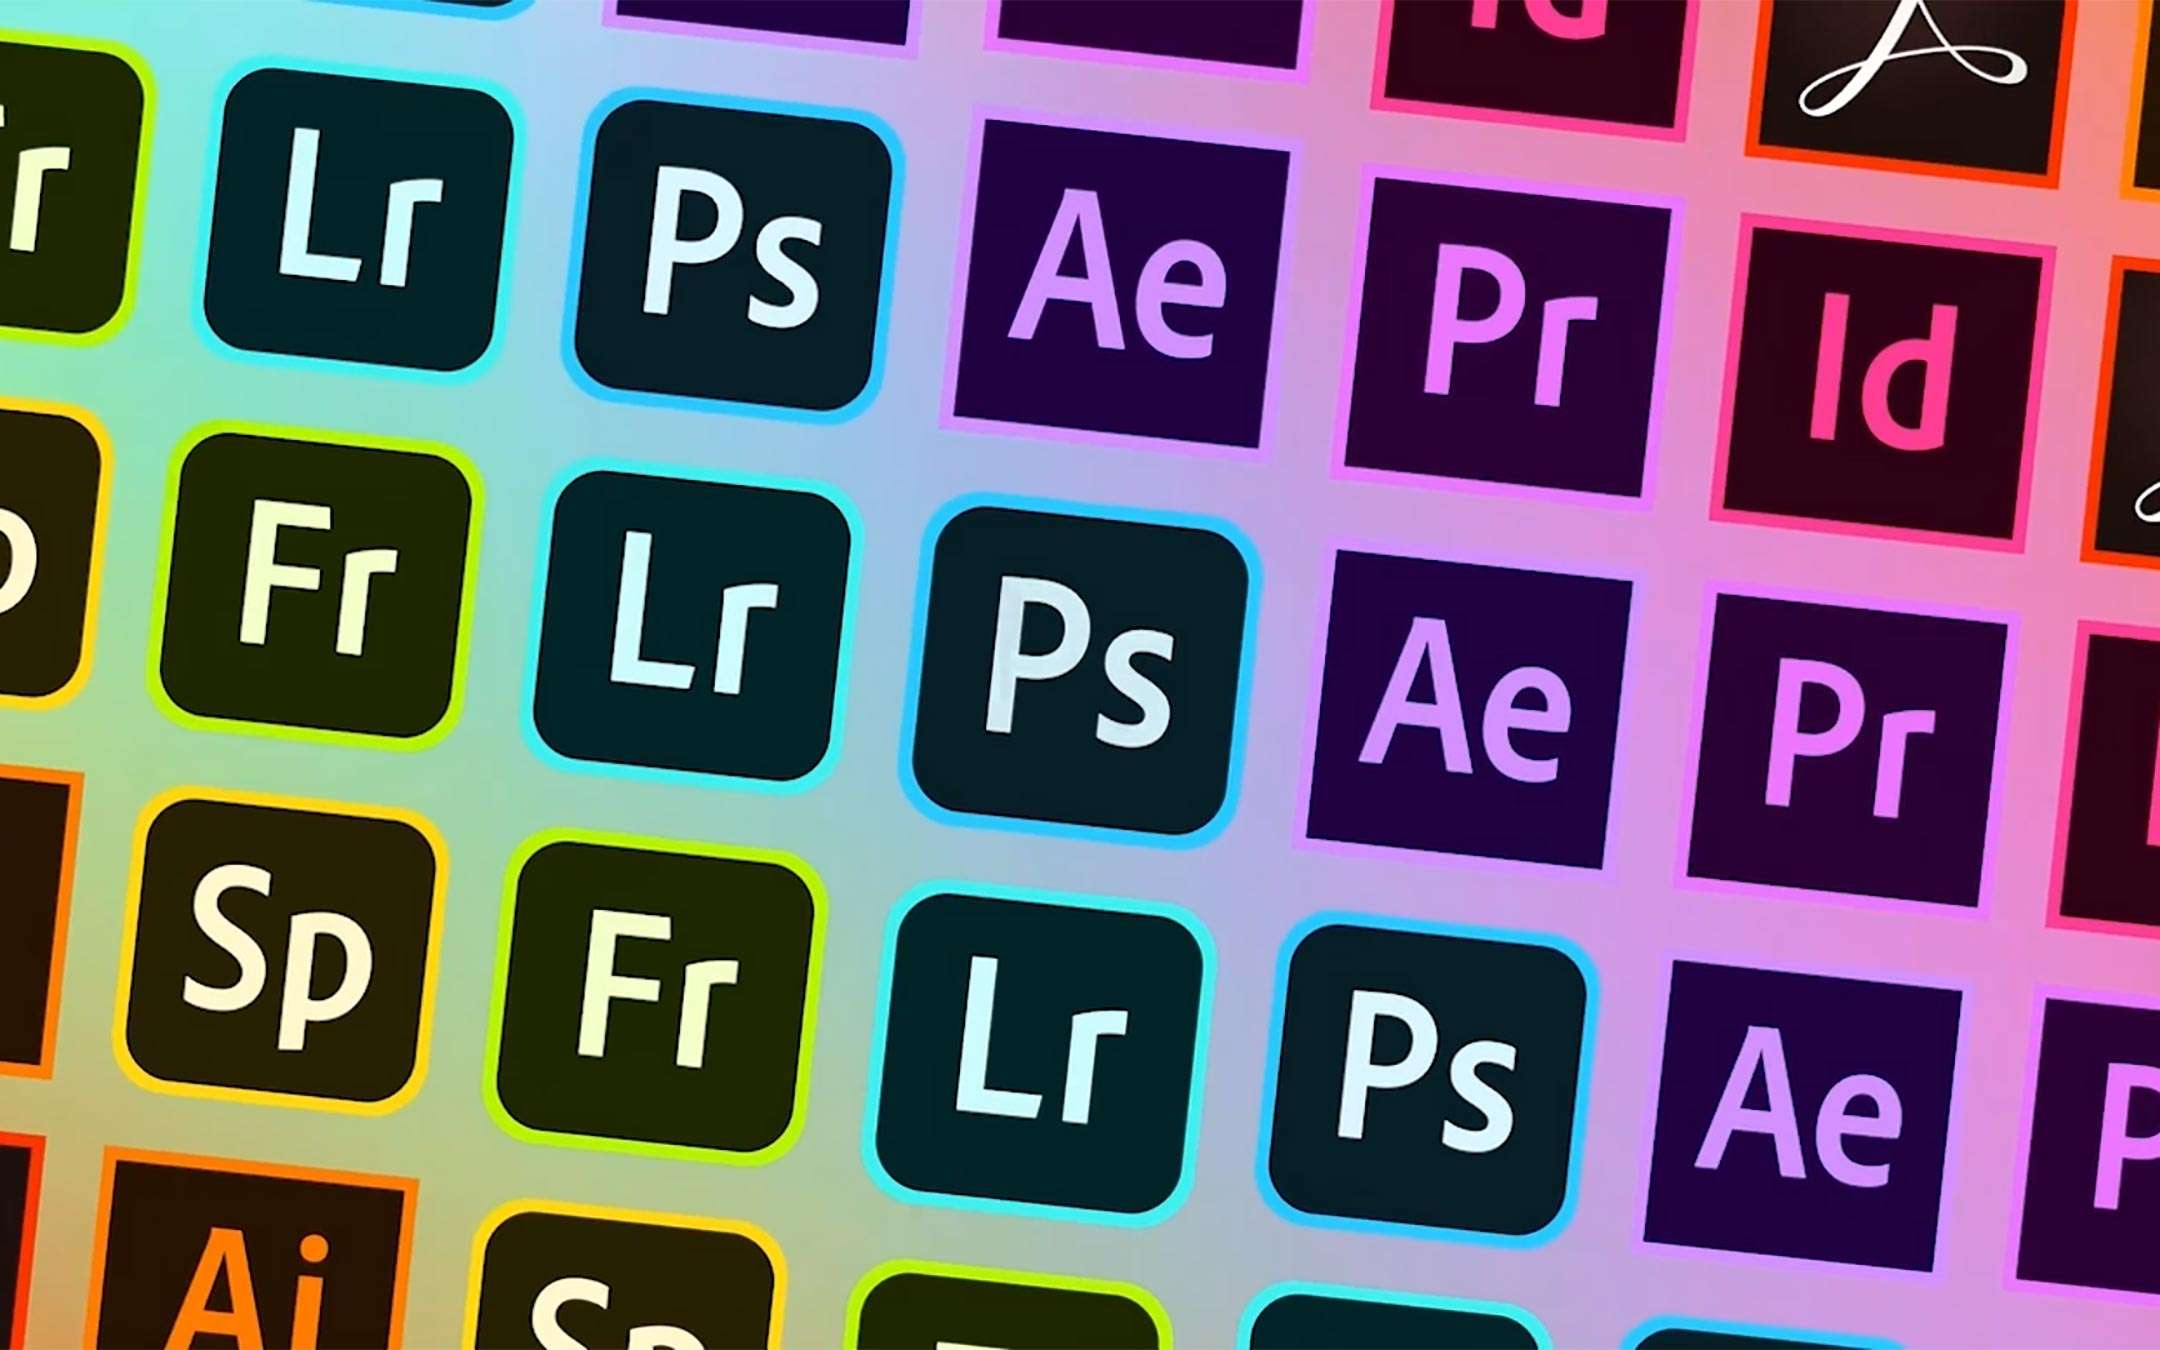 More and more cloud for Adobe's business